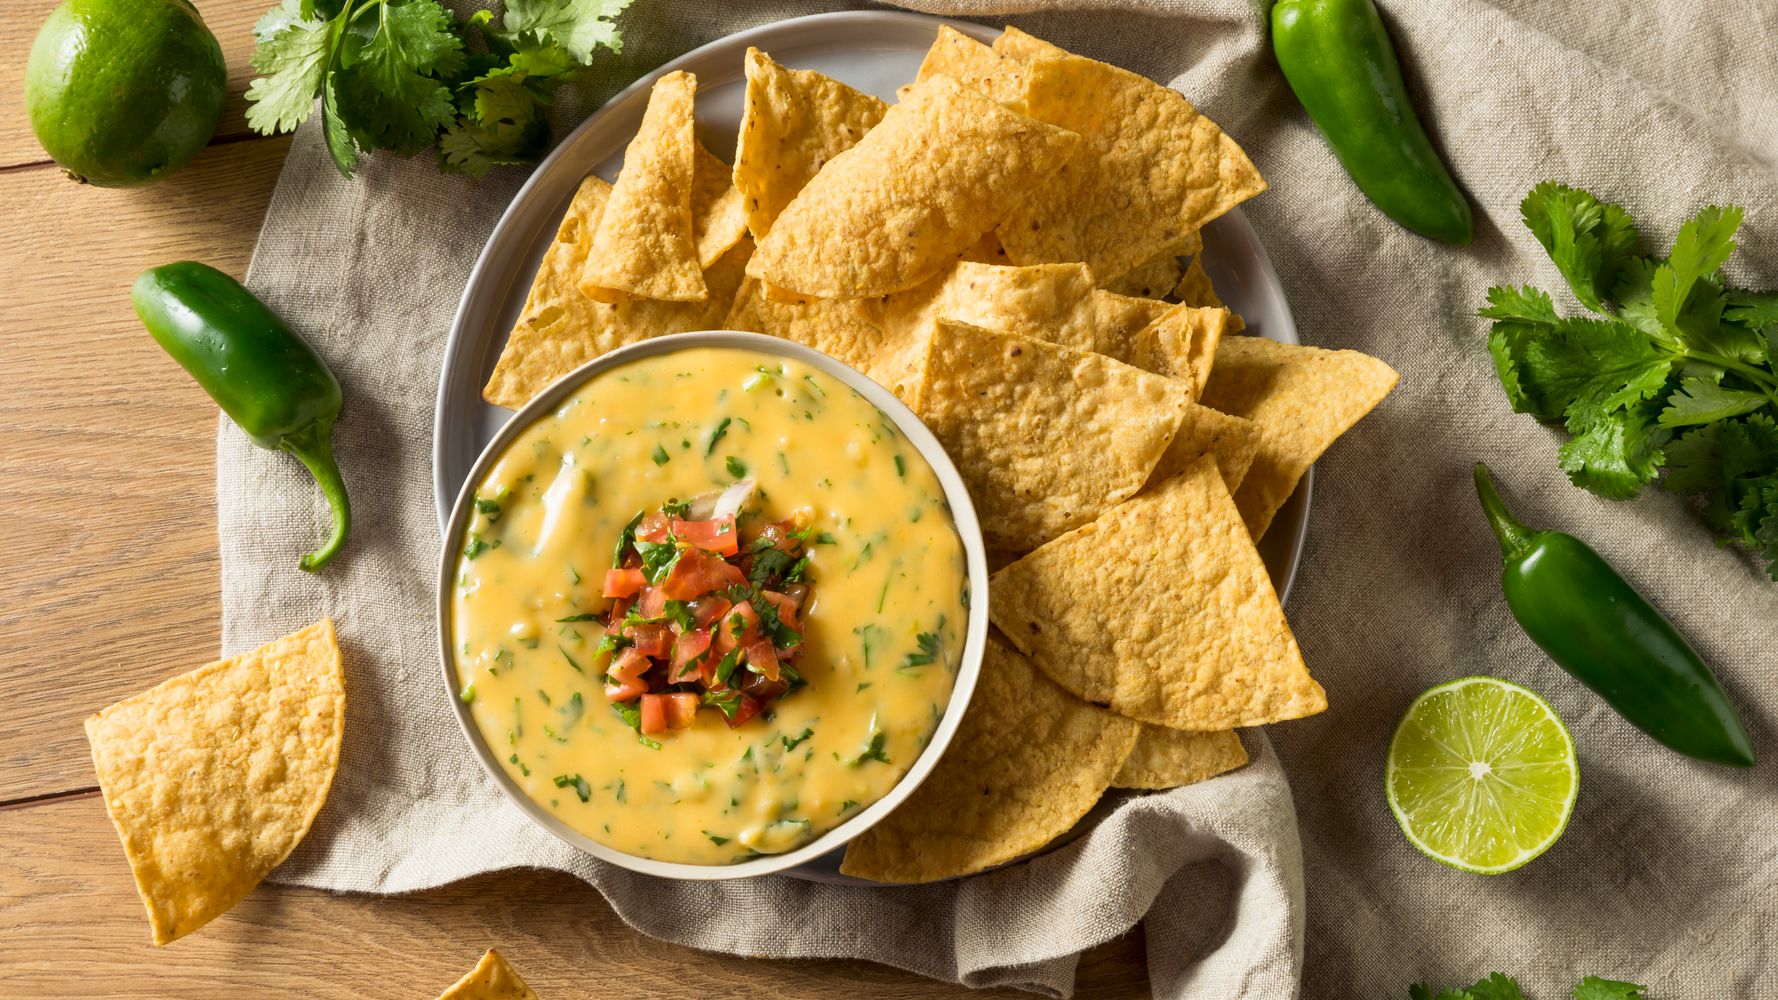 The Best Nacho Cheese: Is It Made With Velveeta, Roux Or Plain Melted Cheese? photo